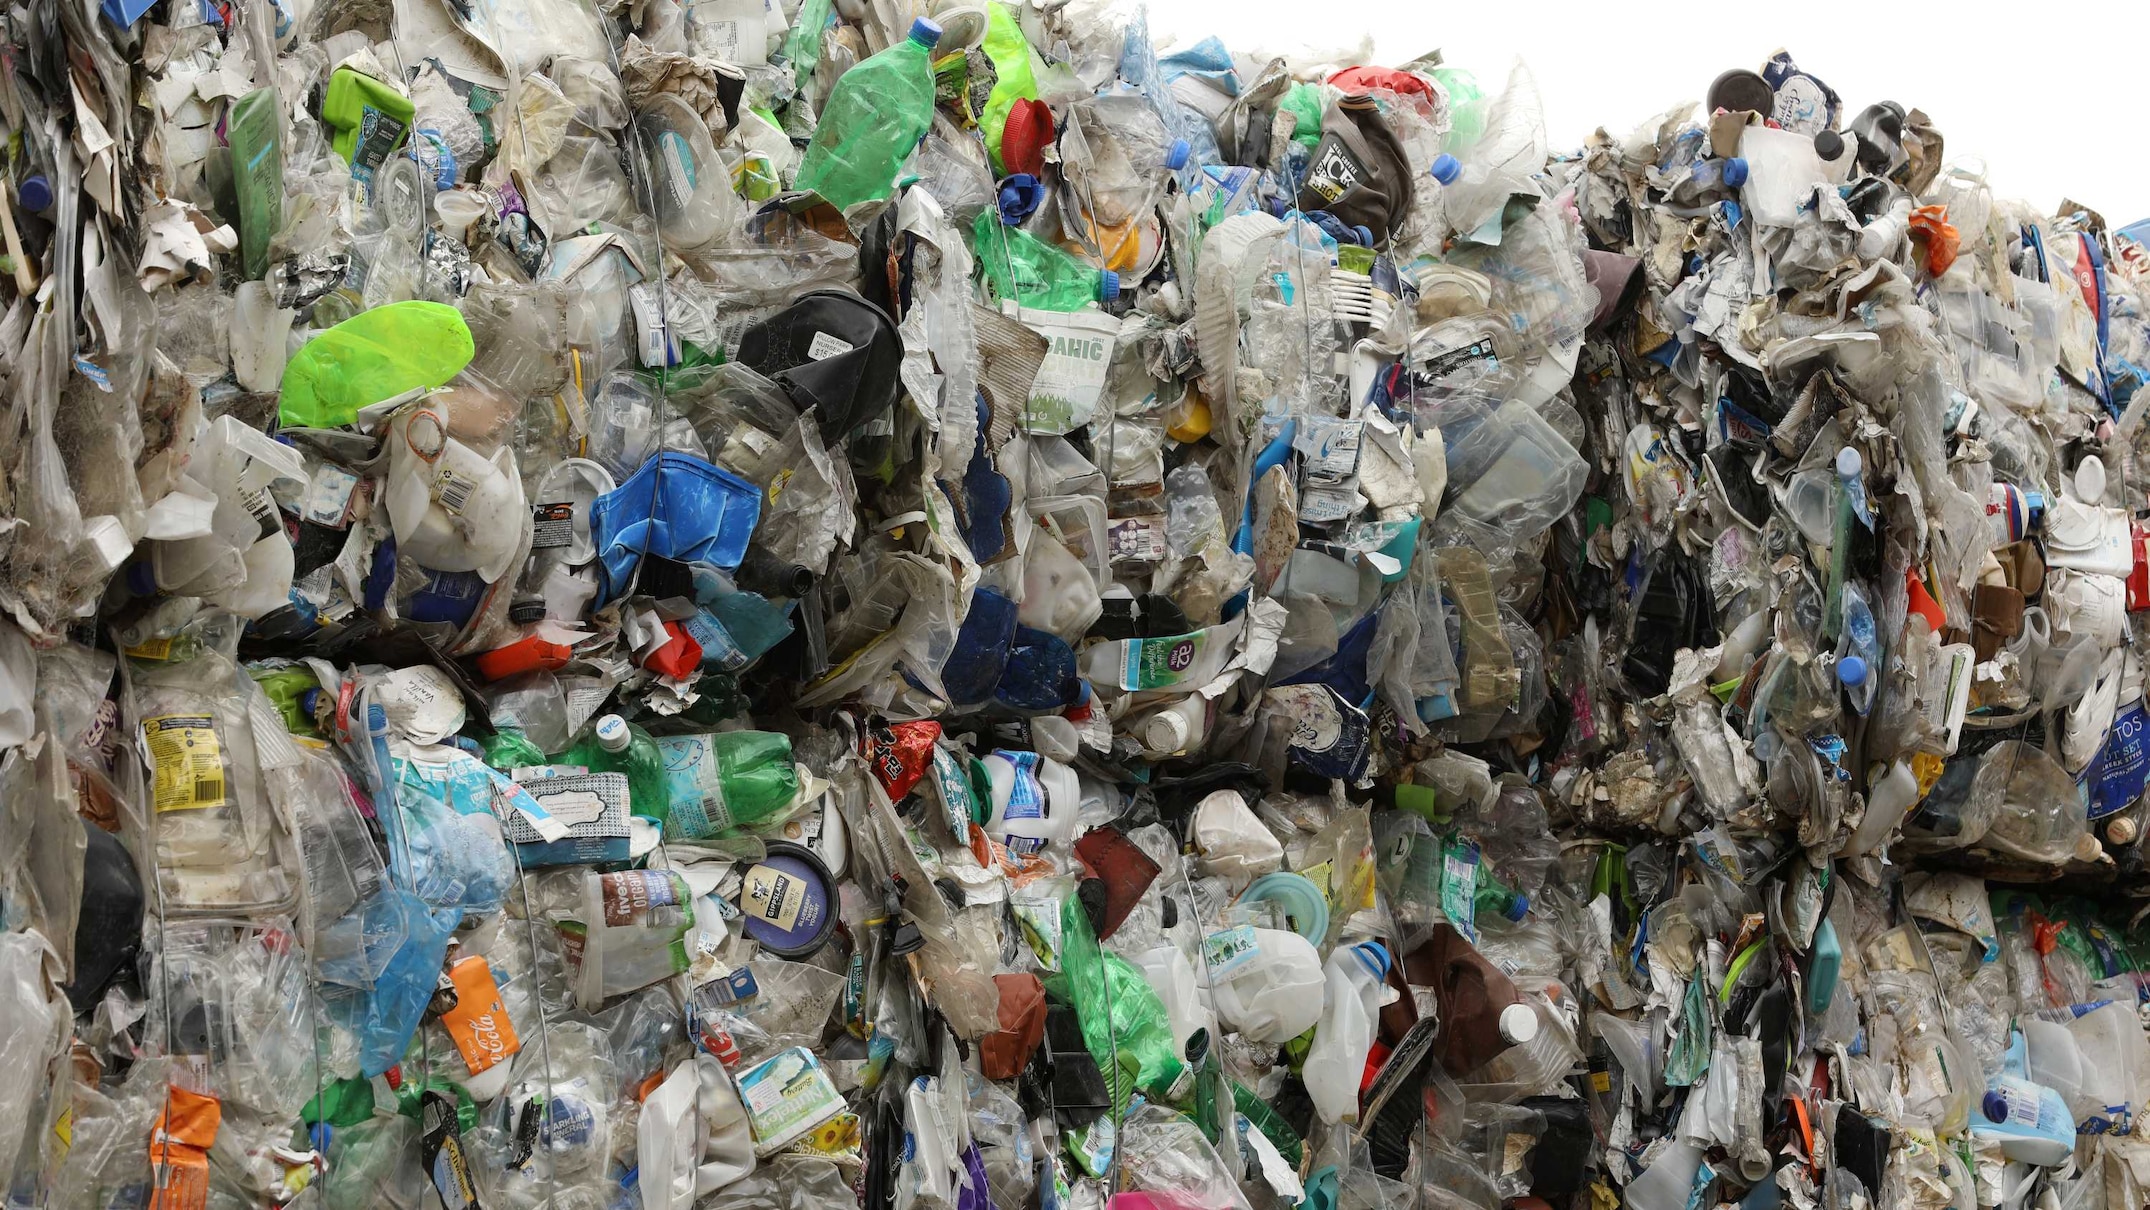 waste export levy to be scrapped in federal budget after warnings 'recycling tax' would send more waste to landfill